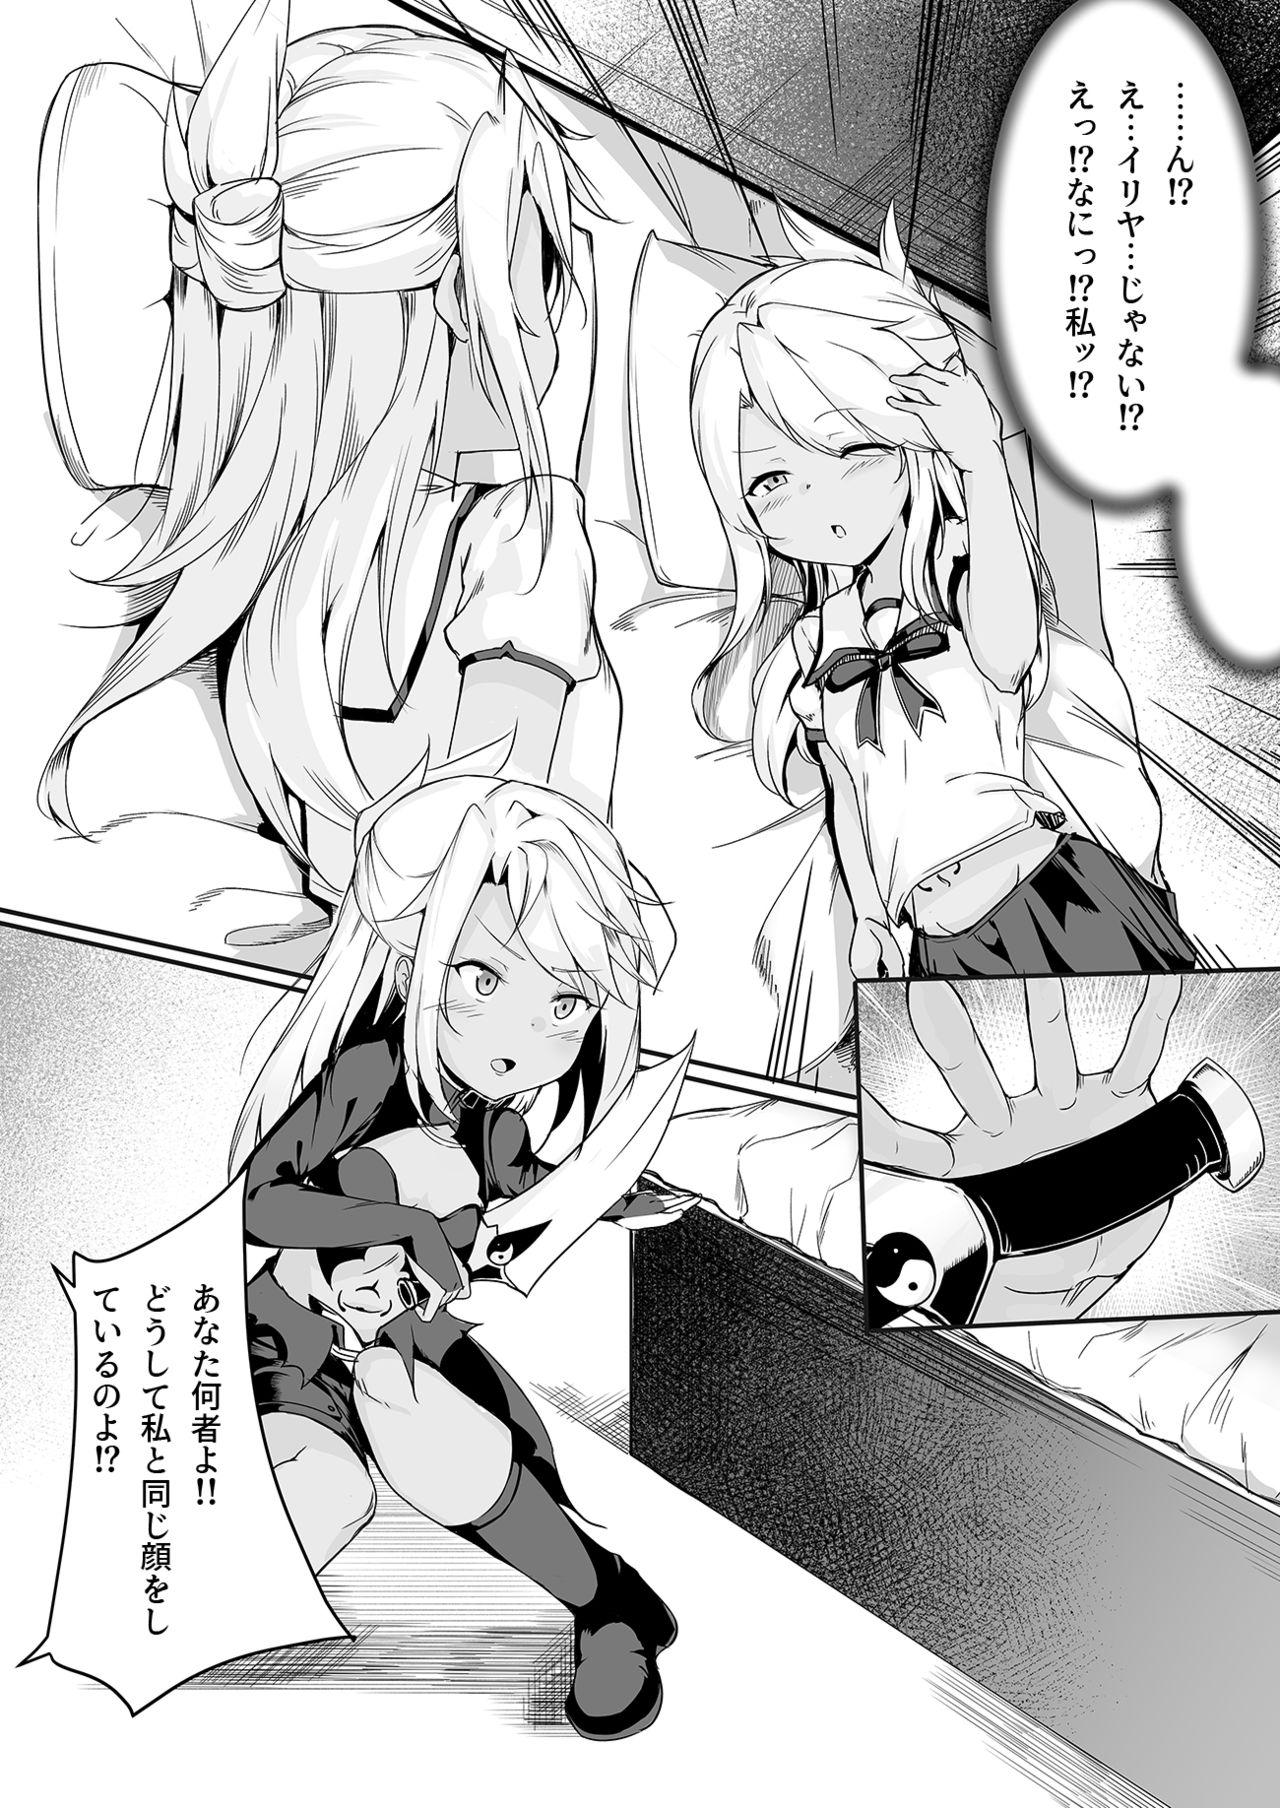 3some CHLOE x CHLOE - Fate kaleid liner prisma illya Stepdaughter - Page 4